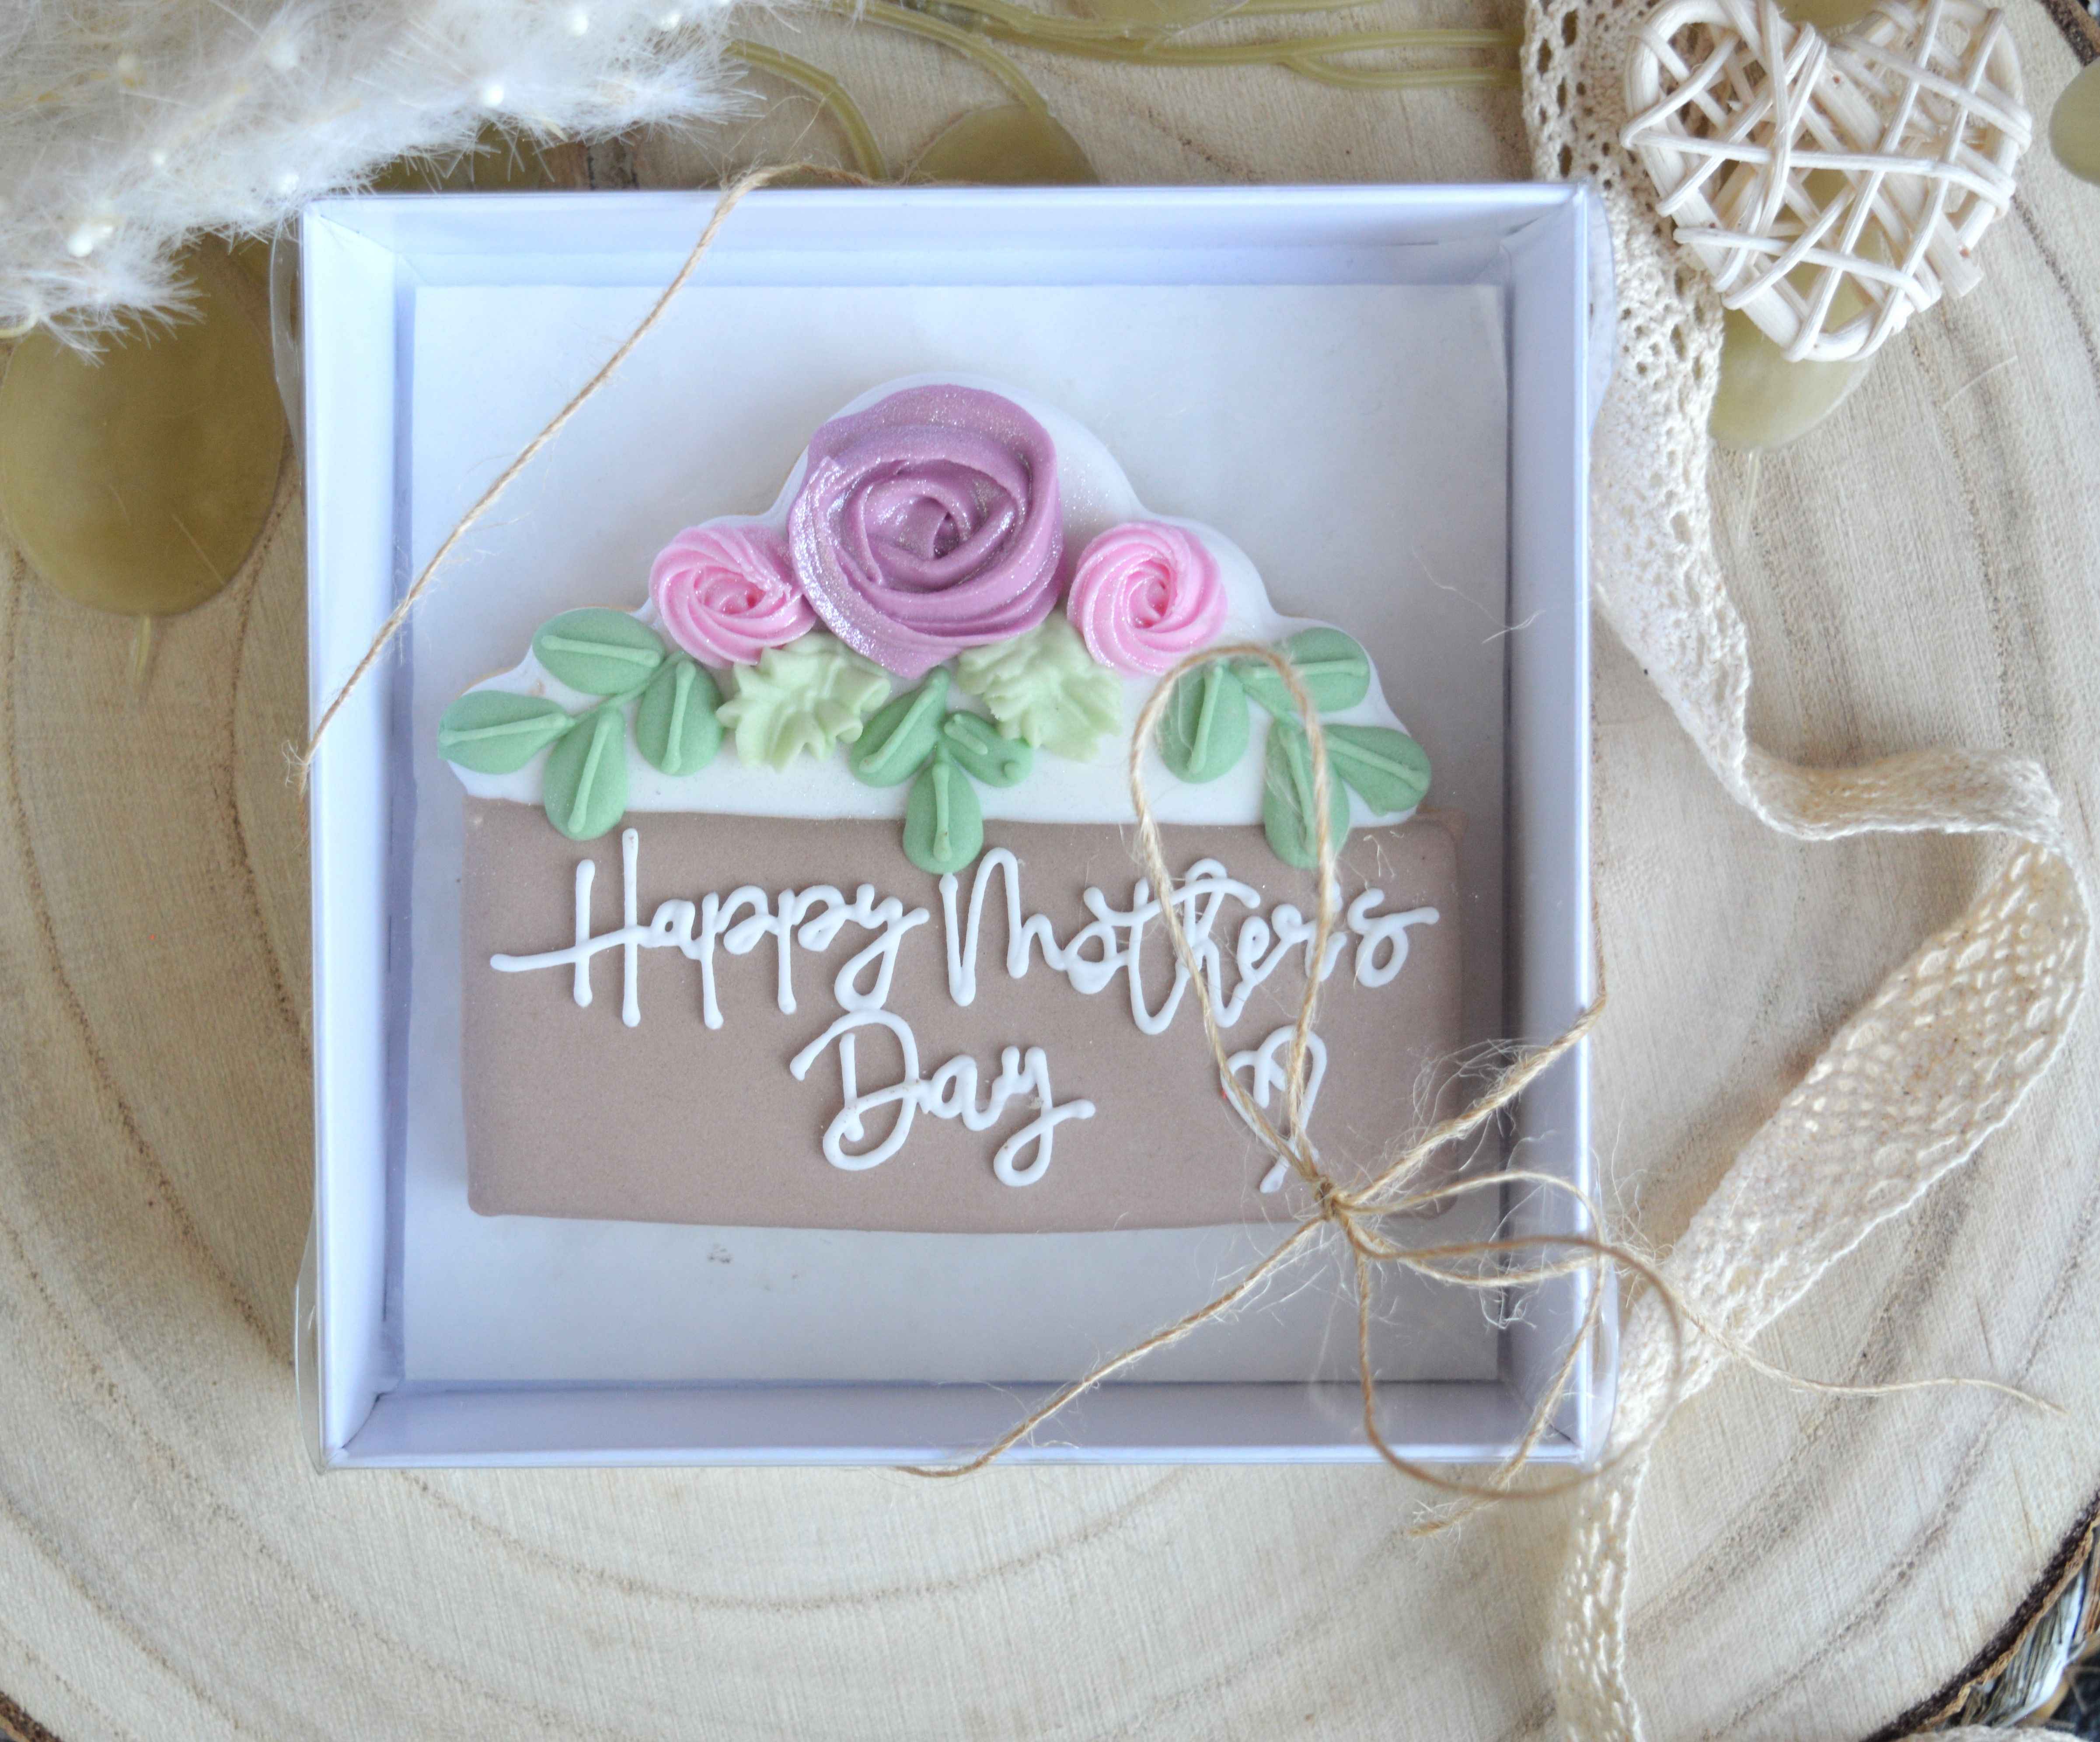 Happy Mother's Day-Mother's Day-Mother's Day Gift-Birthday Gift-Anniversary gift-Thank you gift-Custom made-Cookies-Biscuits-Party Favor